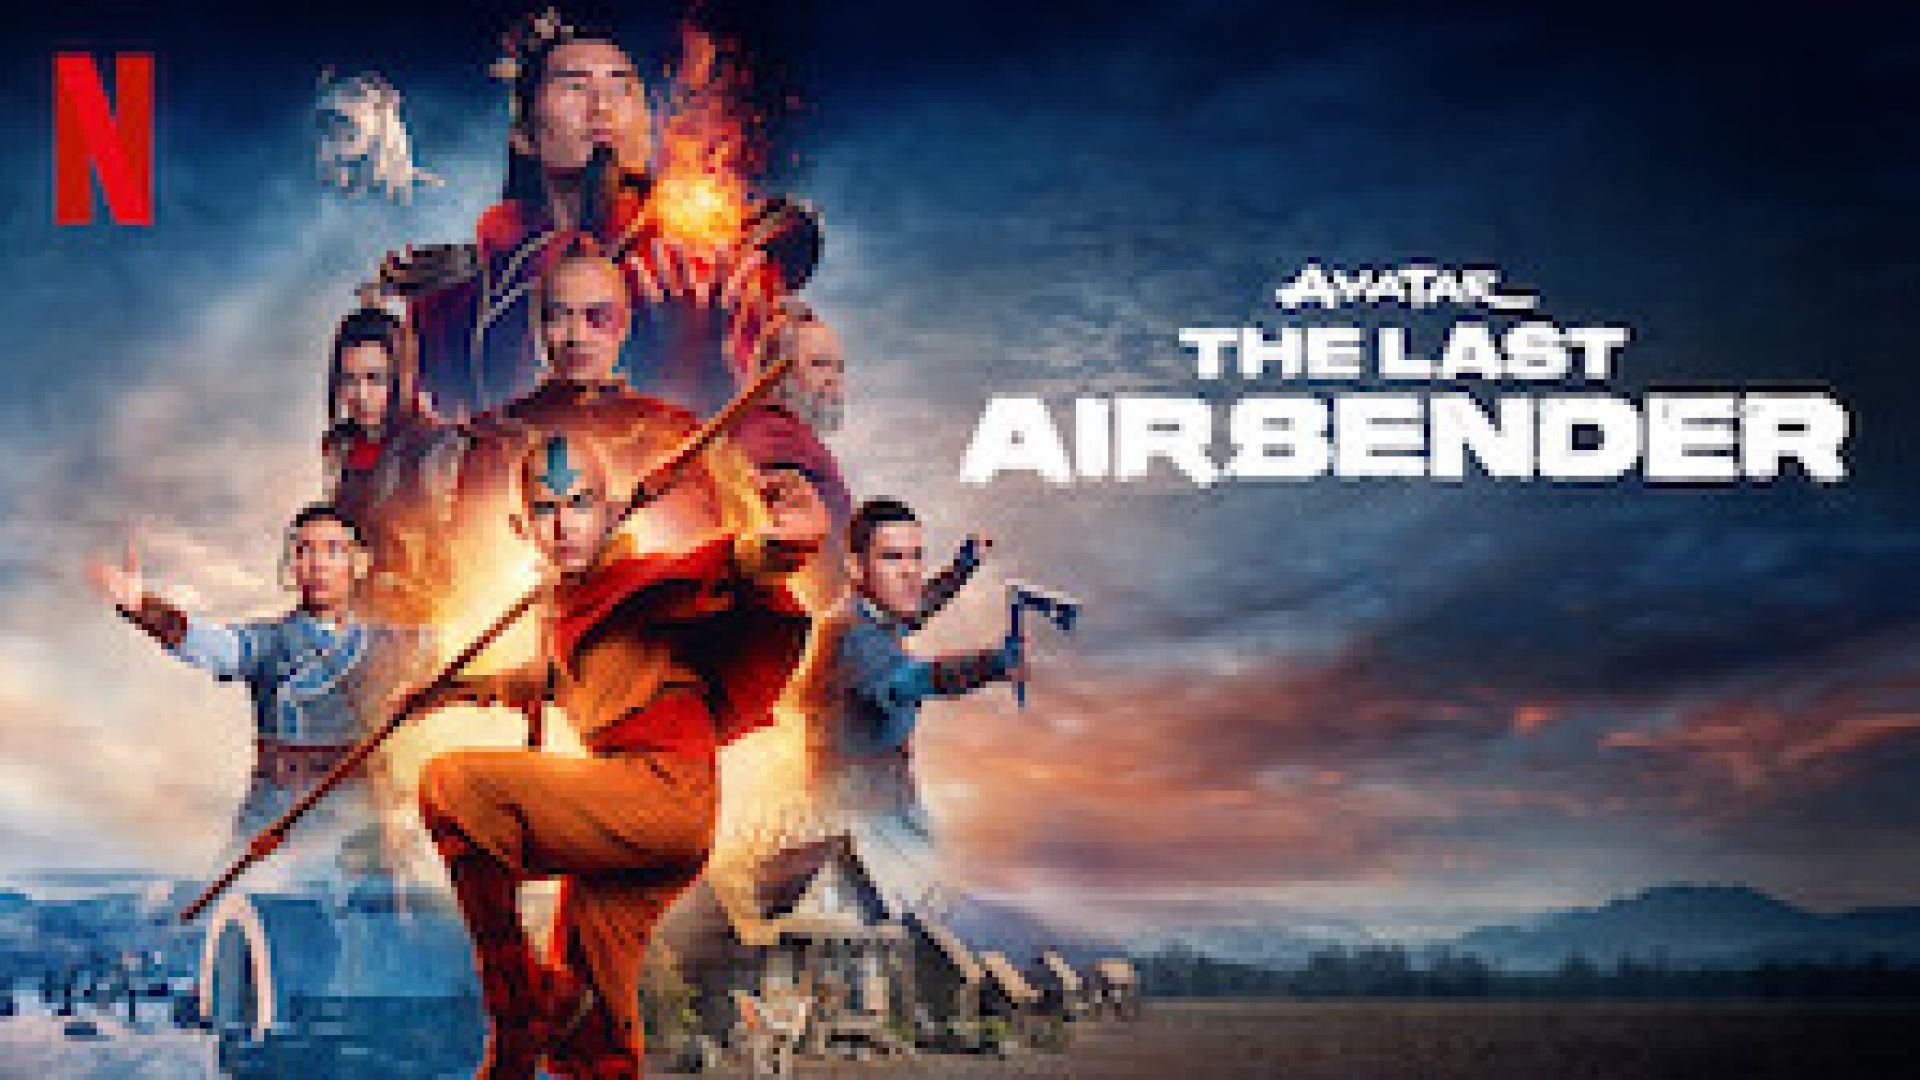 Avatar: The Last Airbender S01E01 (2024) NF WEB-DL [Dubbing Indonesia] [1080p]